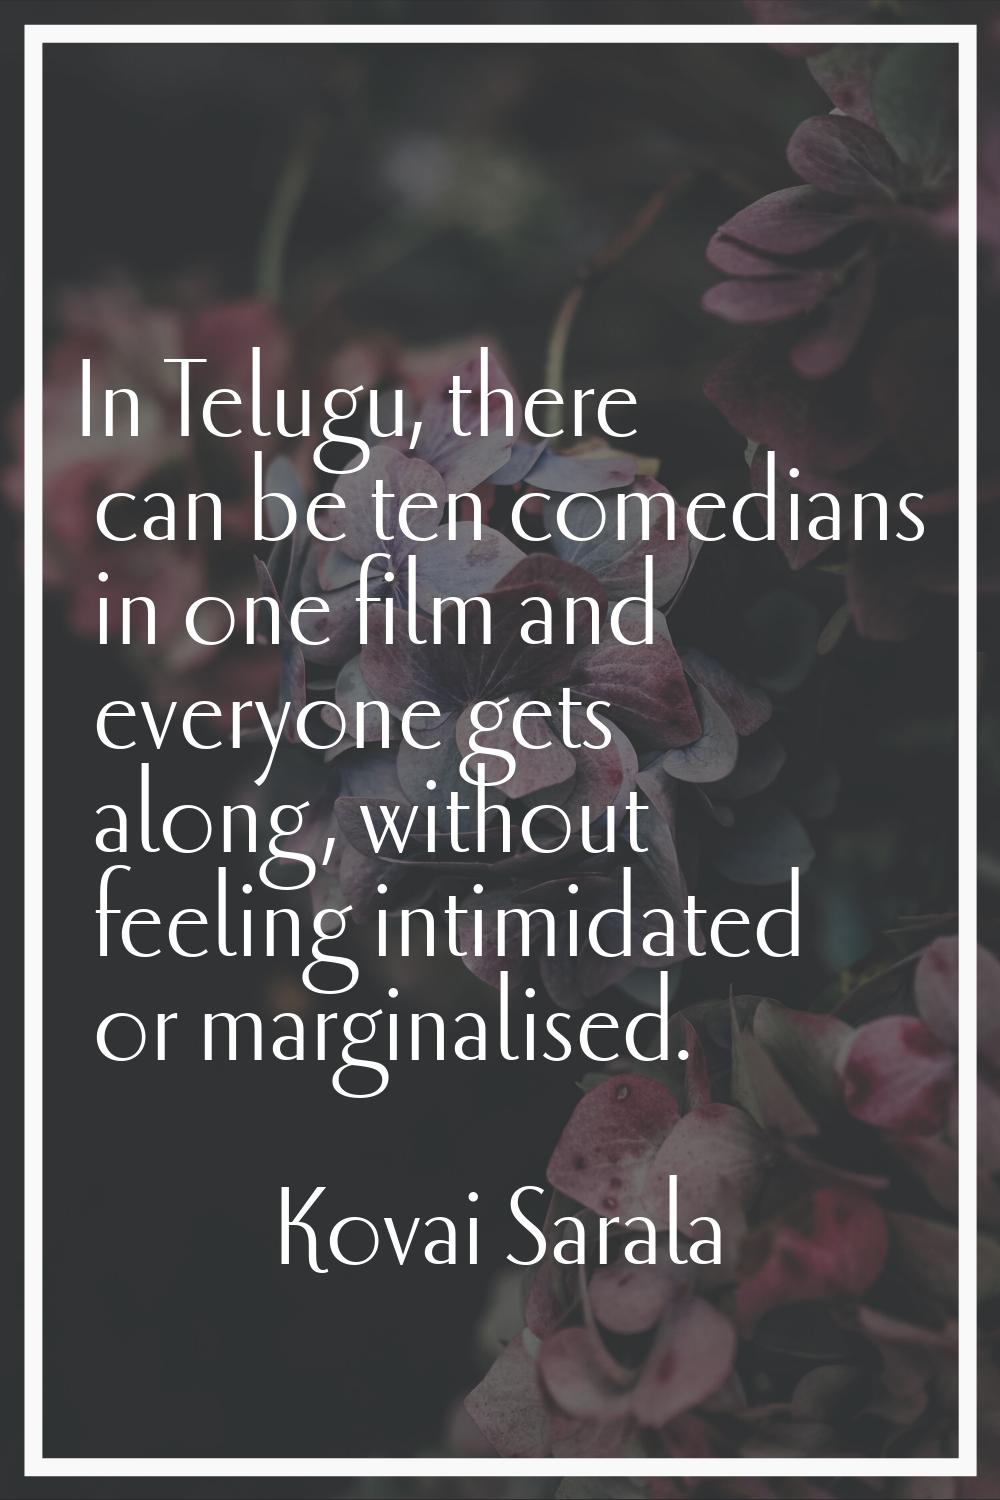 In Telugu, there can be ten comedians in one film and everyone gets along, without feeling intimida